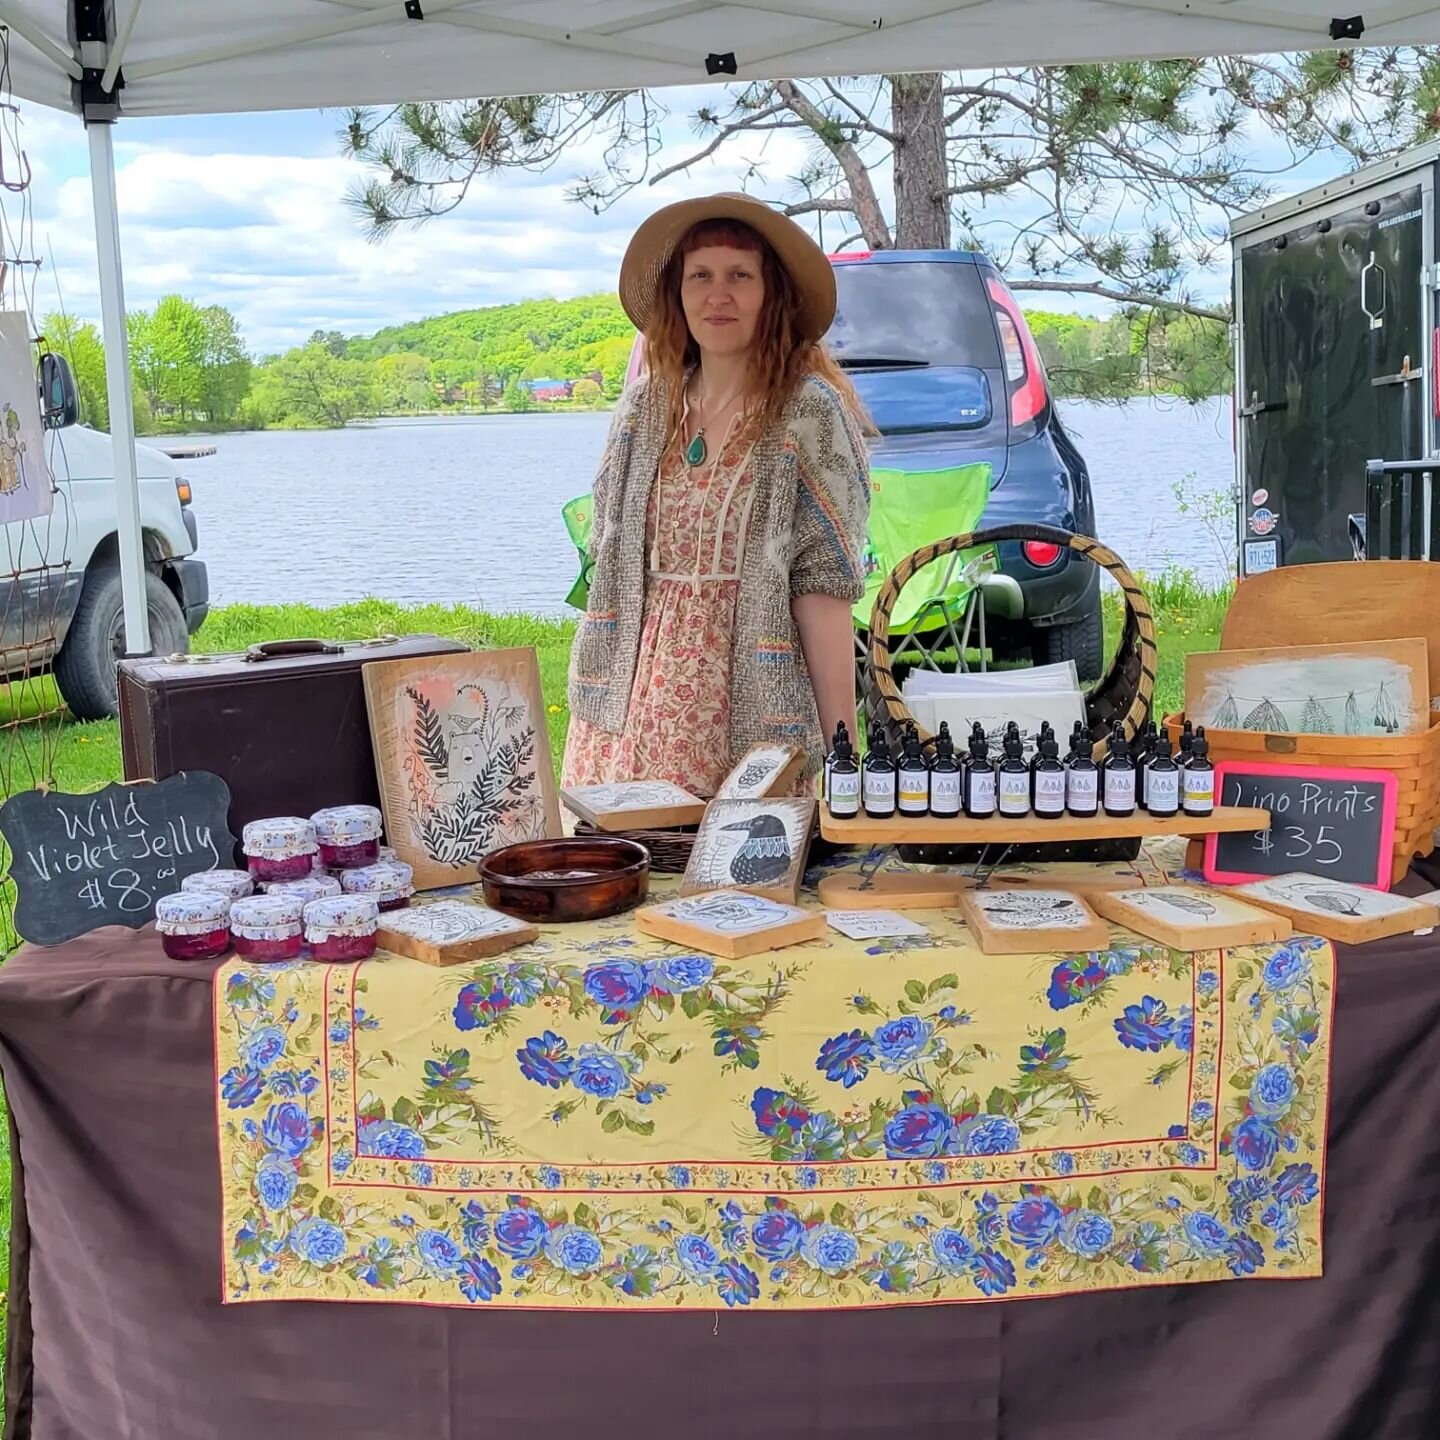 So excited to welcome @woodsmokeandlore to the @haliburton_farmers_market !! They have a beautiful array of art prints, tasty herbal eats, heirloom tomato starts, and herbal remedies and teas!! Check them out tuesdays in head lake park from 12-4pm!
.